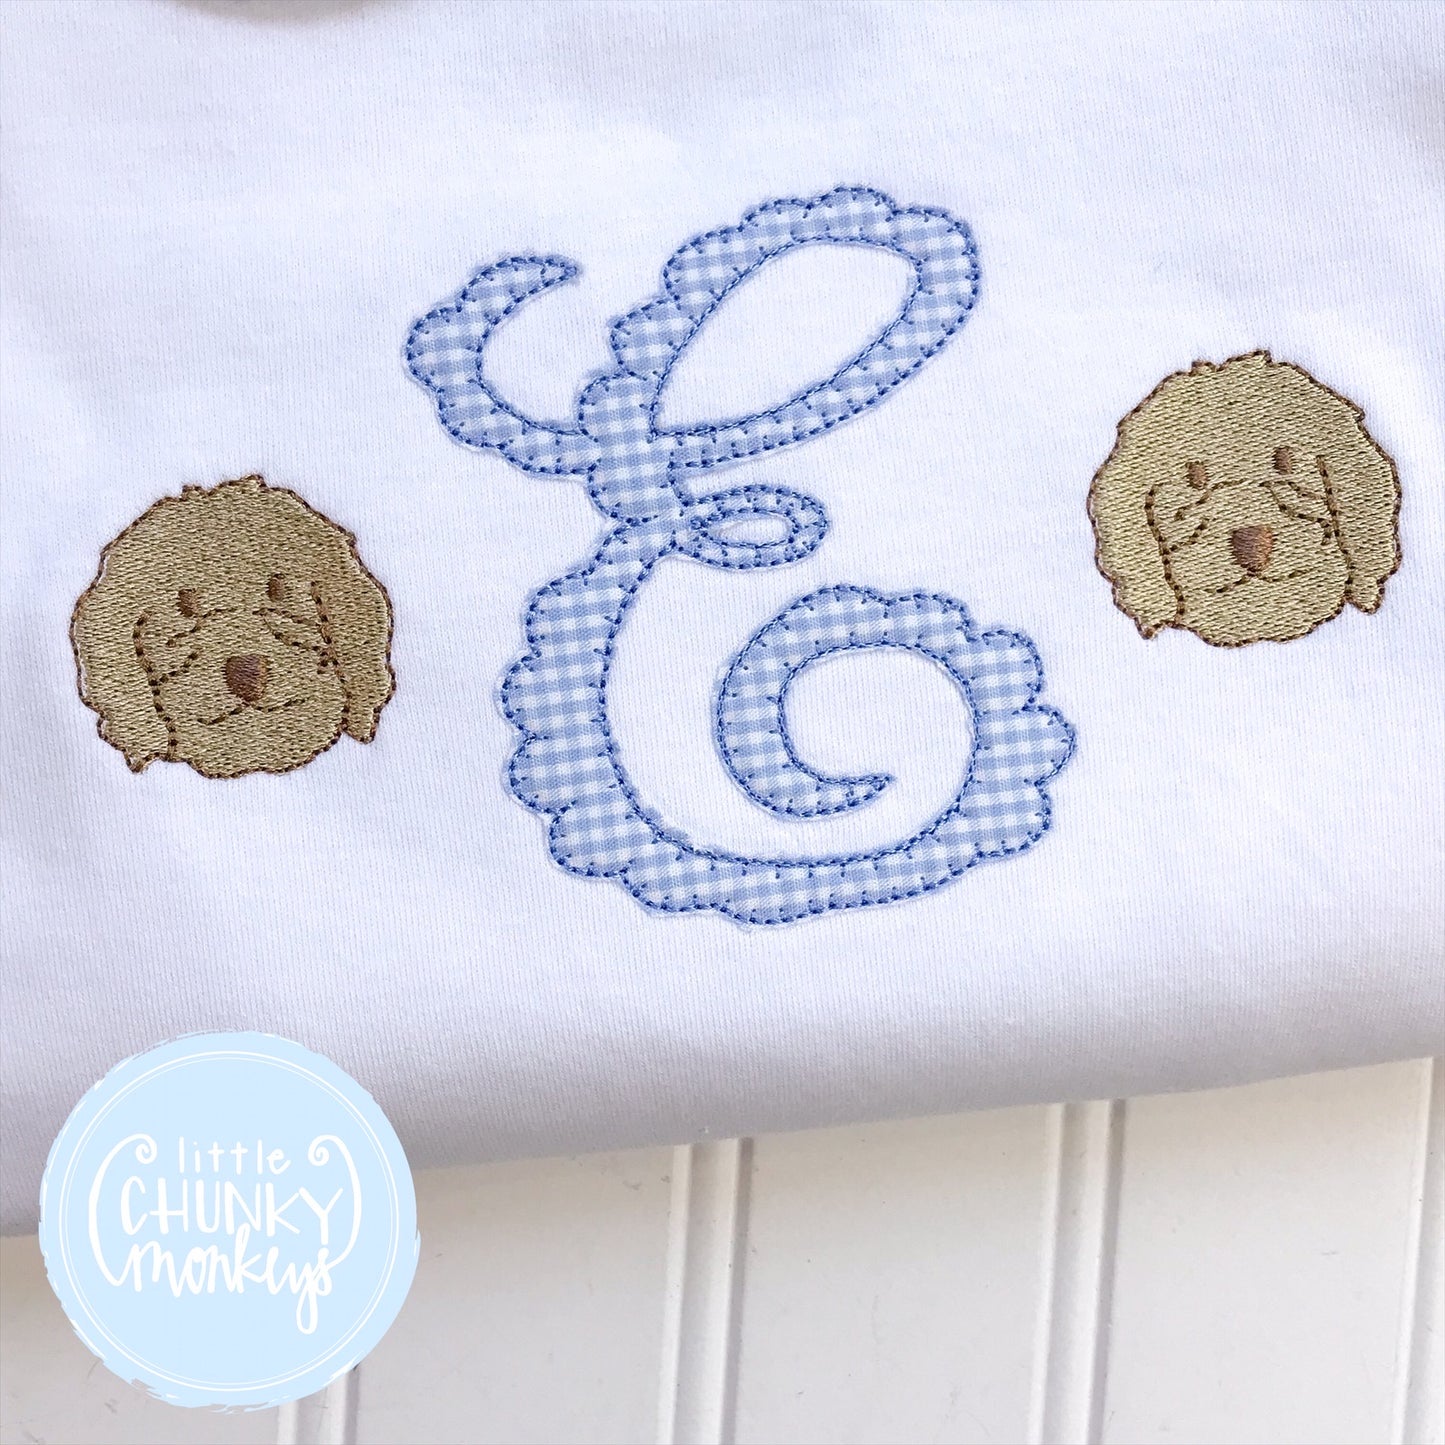 Girl Peter Pan Collar Shirt - Applique Initial with Puppy faces